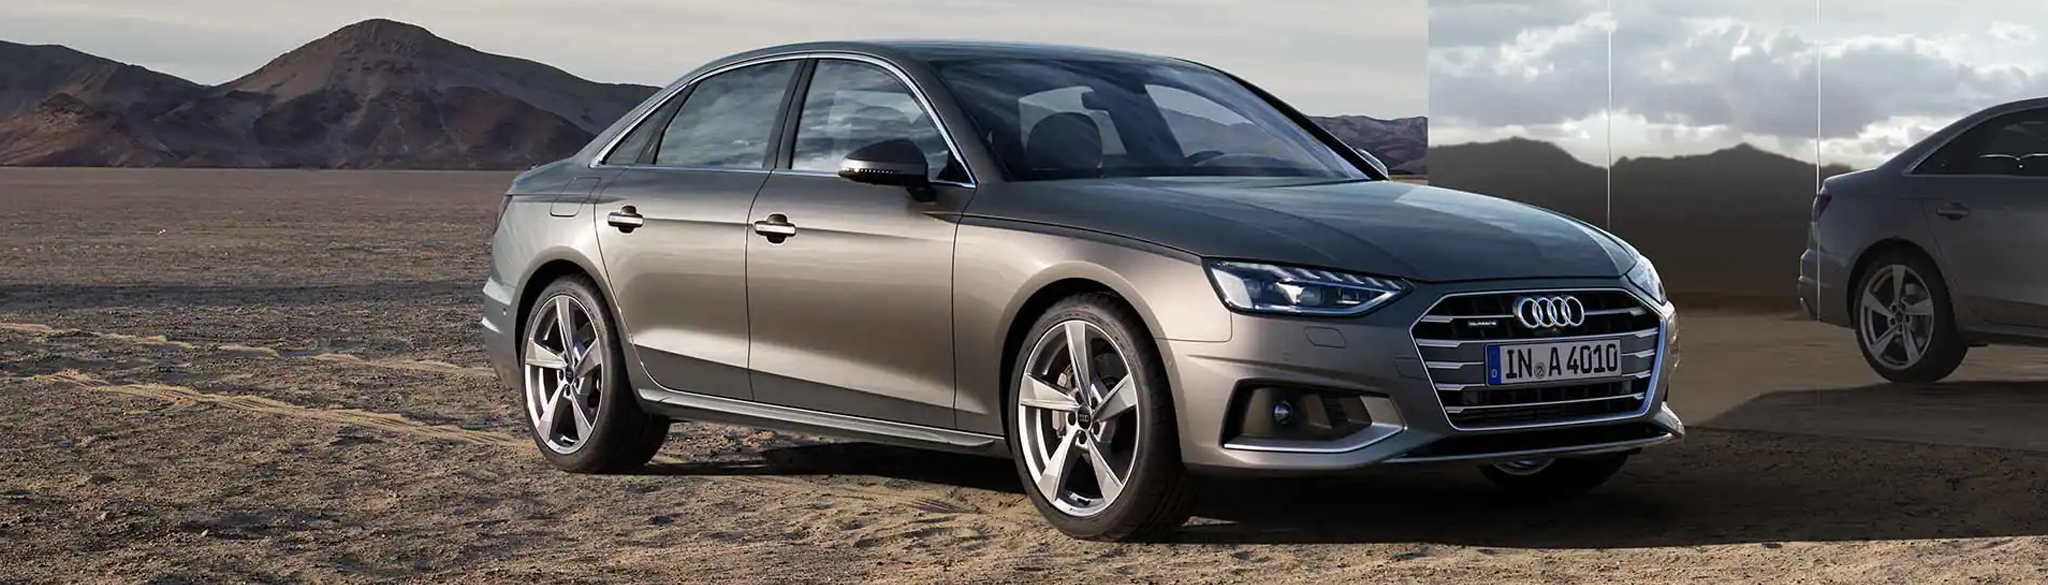 Audi A4 Saloon front side angle in the desert